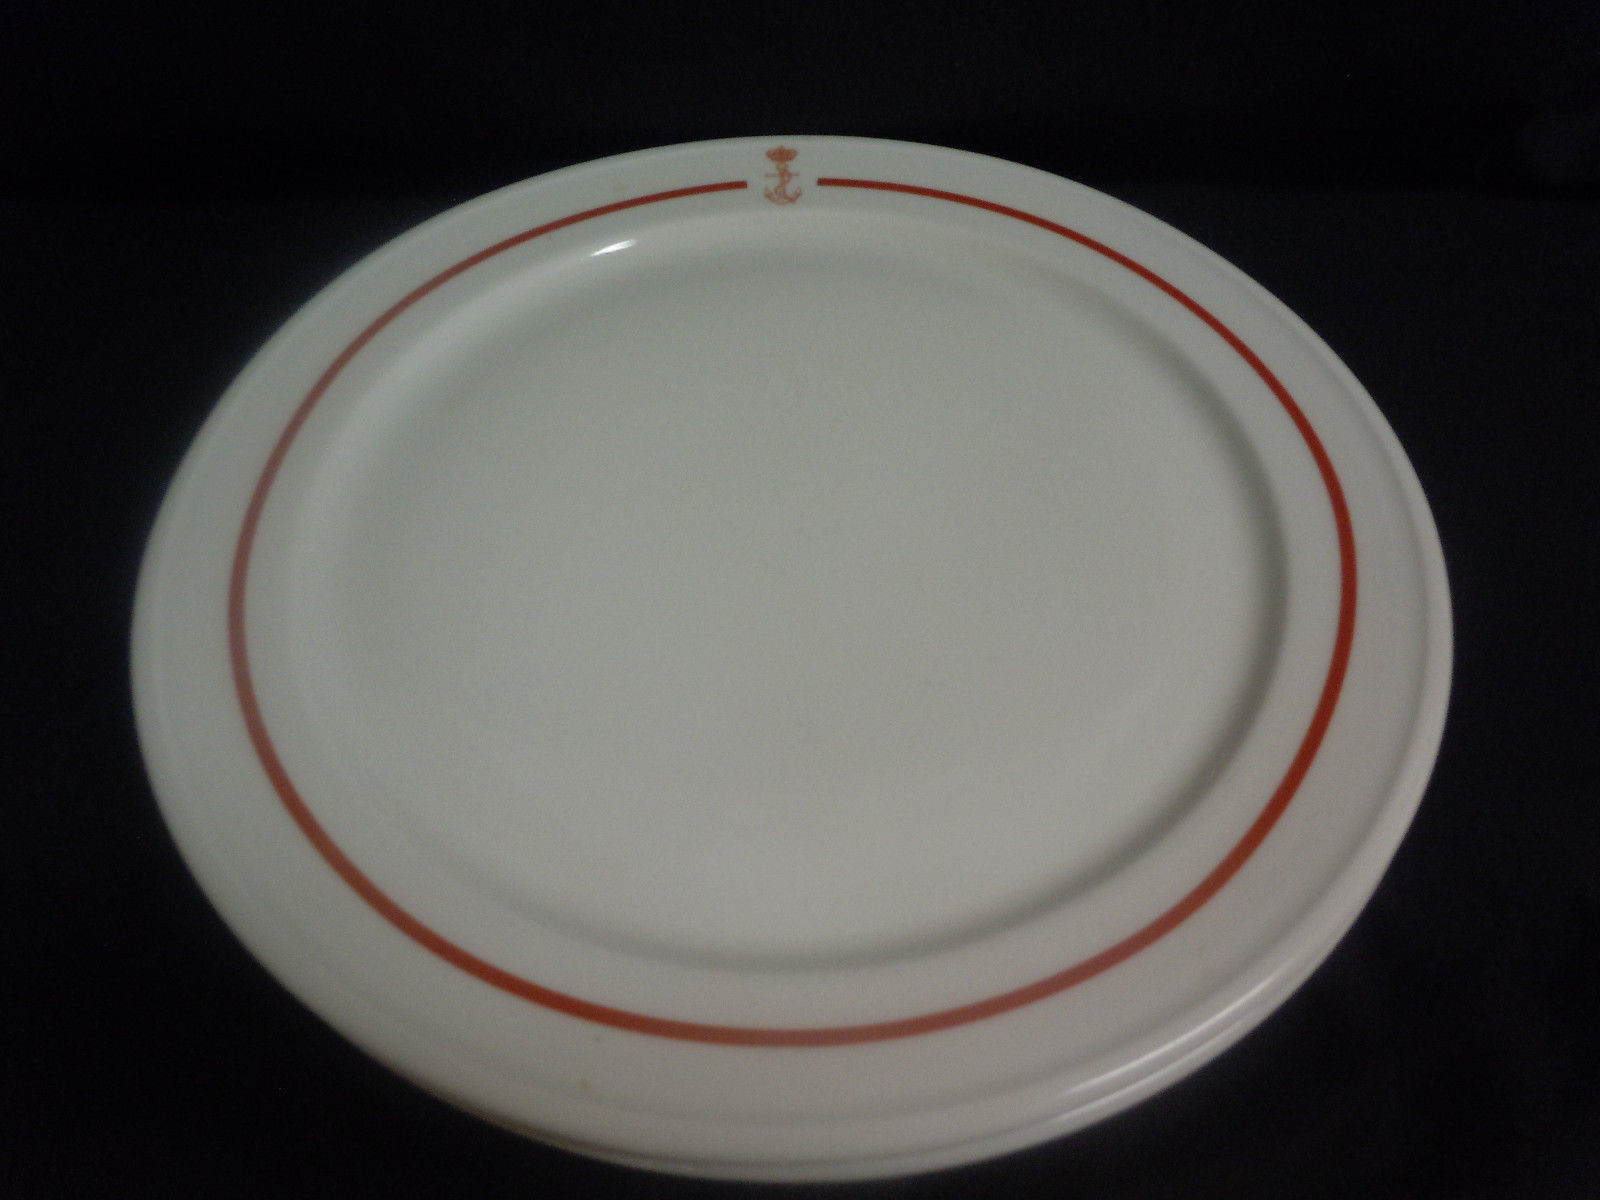 spanish navy dinner plate showing crown and fouled anchor